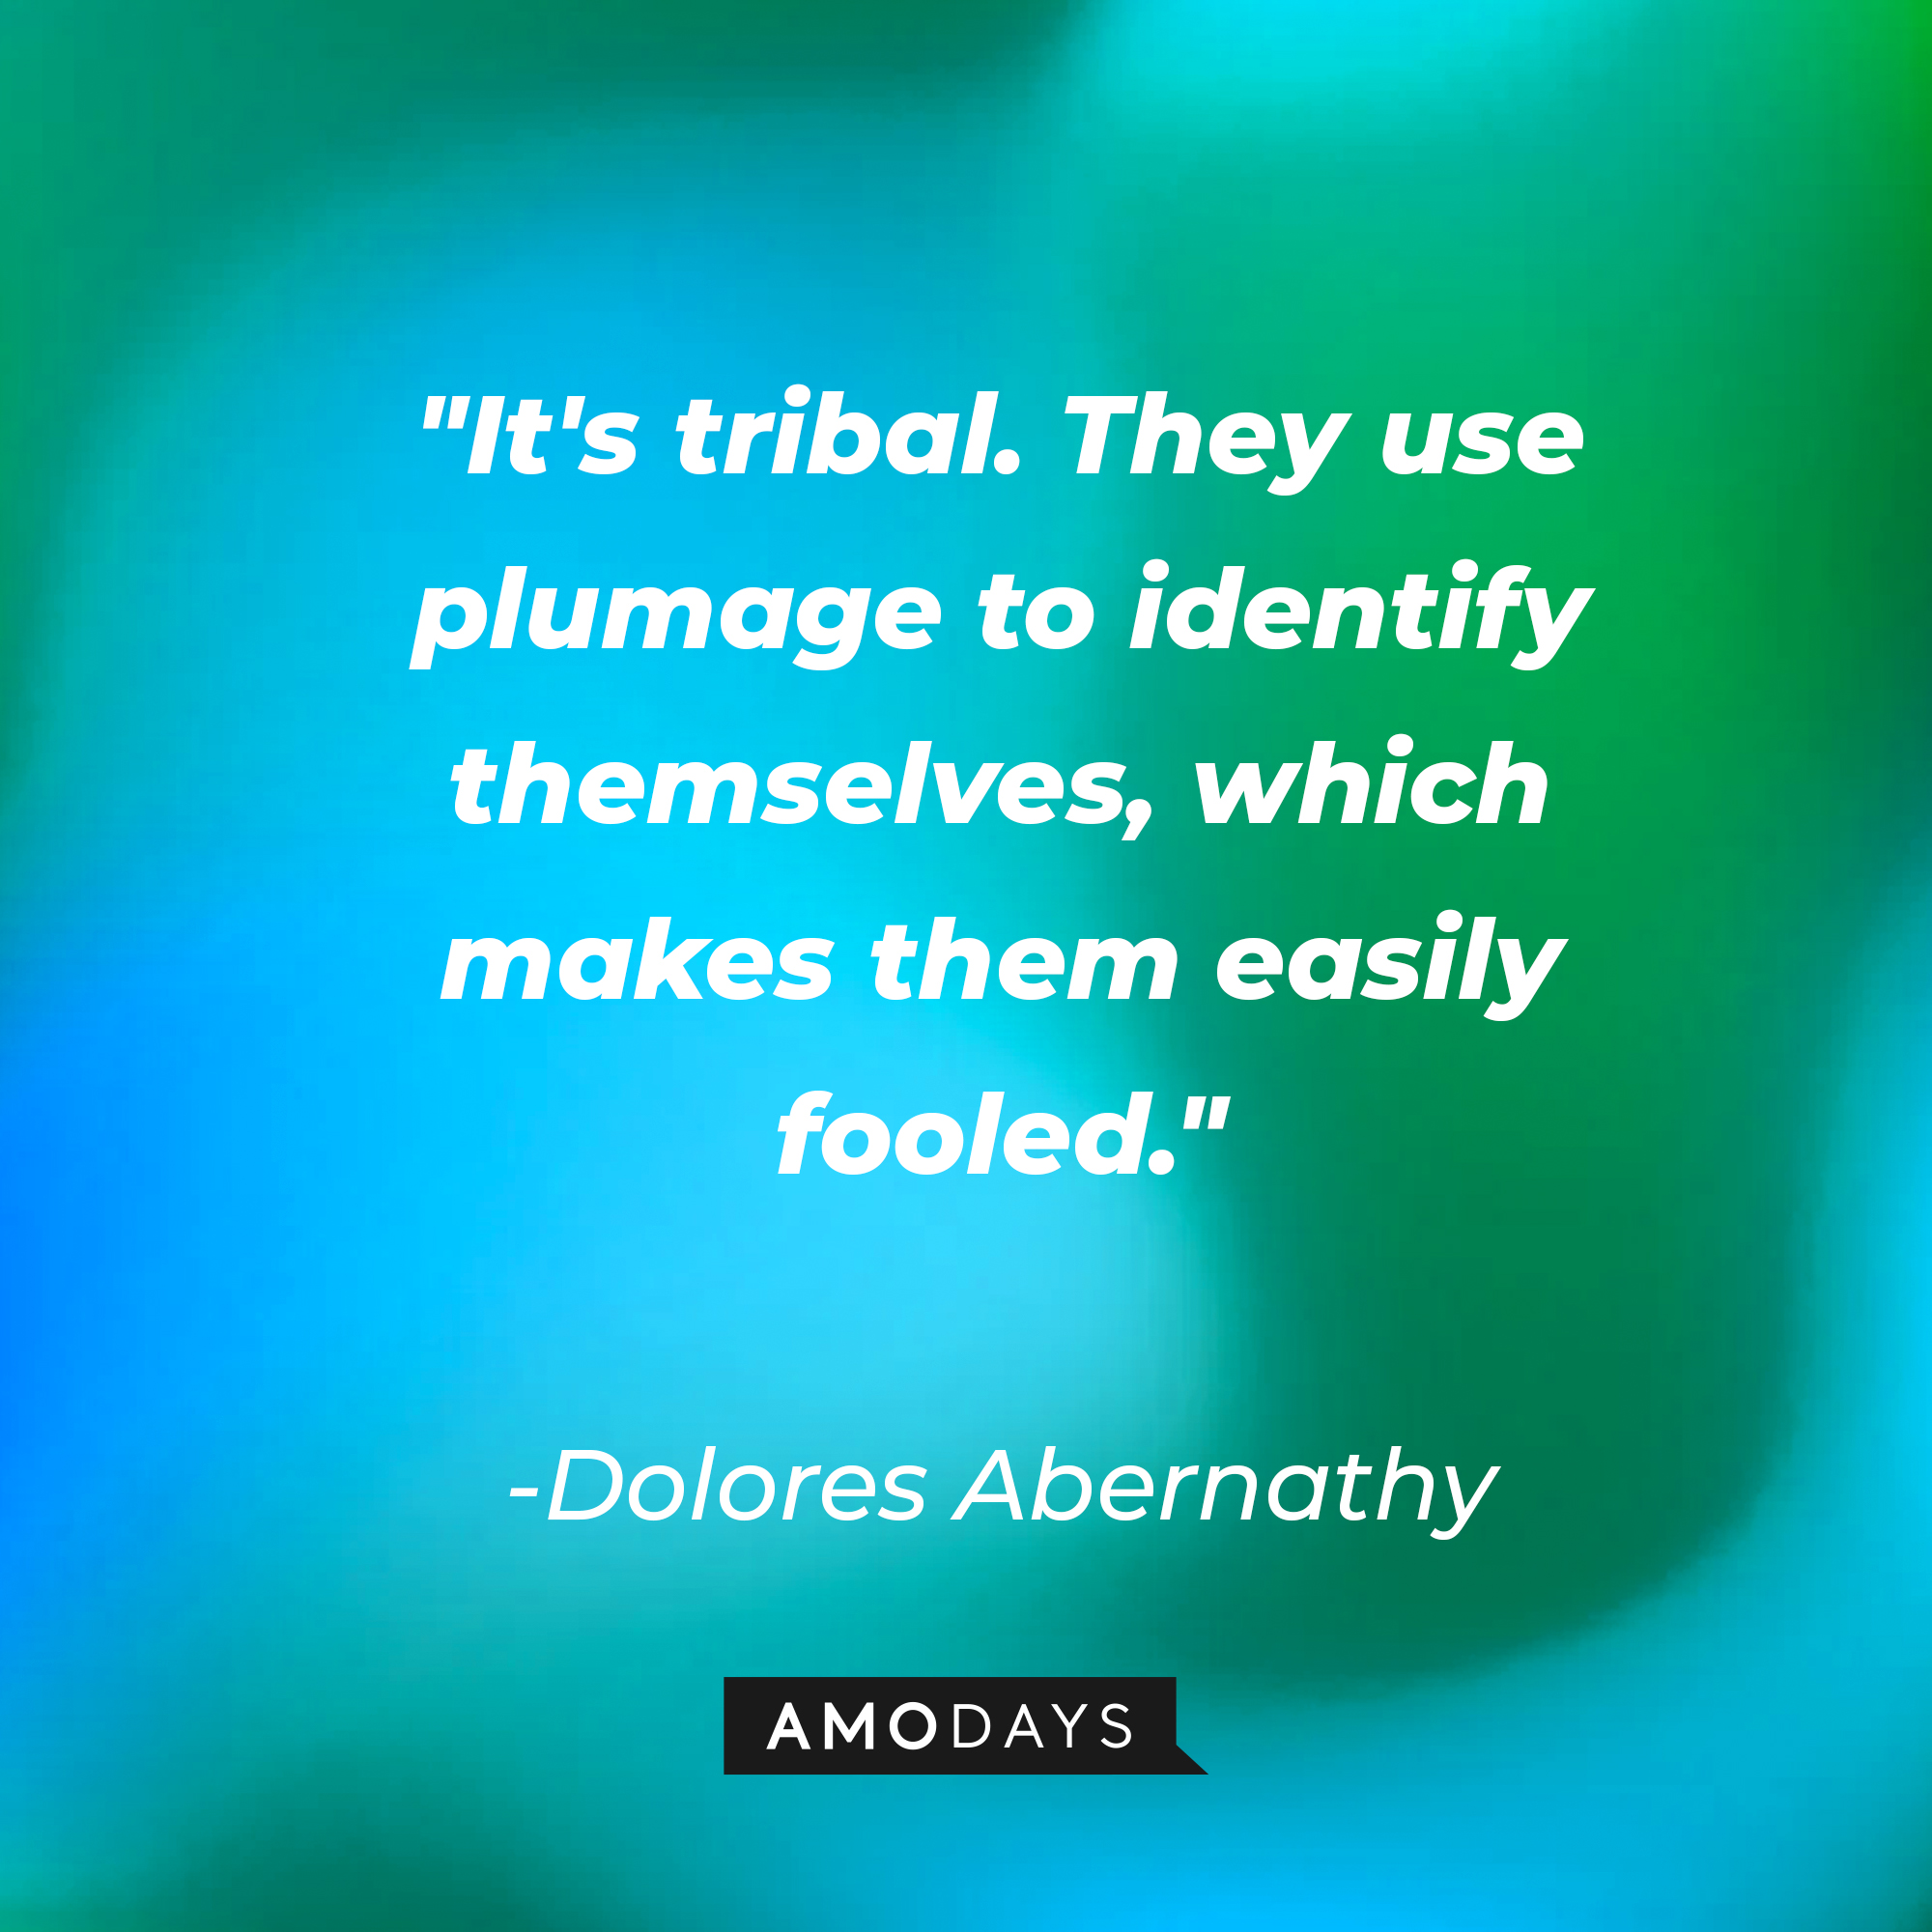 Dolores Abernathy's quote: "It's tribal. They use plumage to identify themselves, which makes them easily fooled." | Source: AmoDays